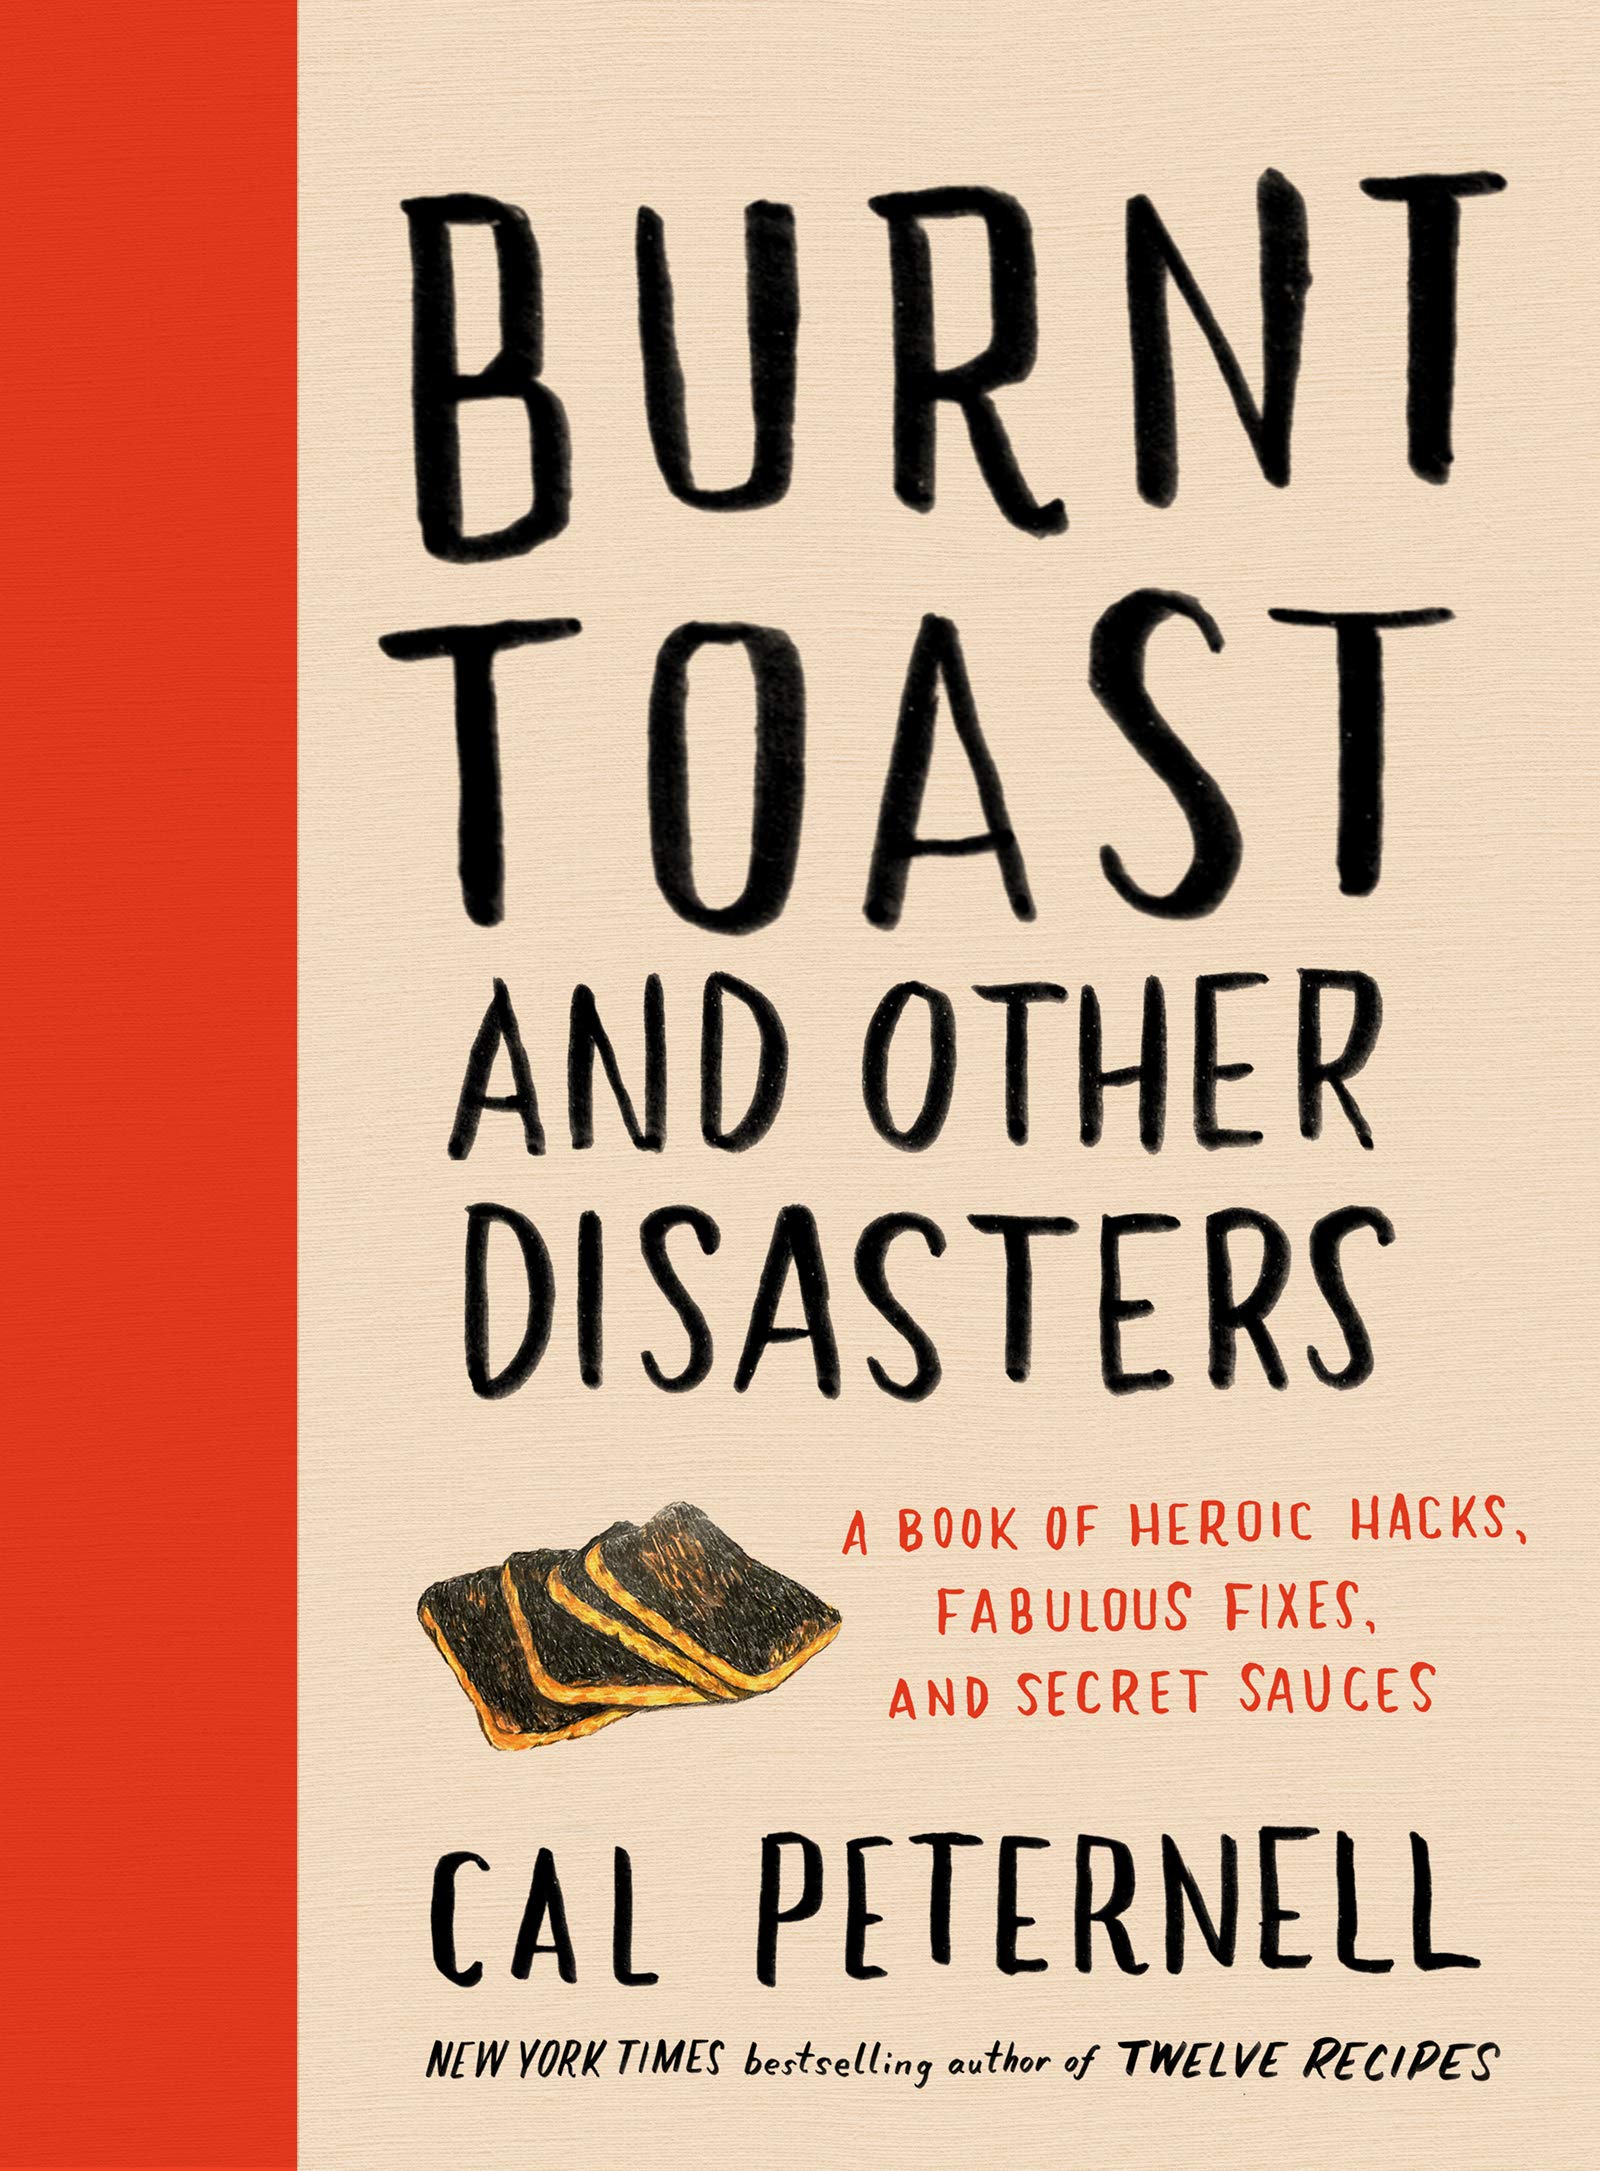 *Sale* Burnt Toast and Other Disasters: A Book of Heroic Hacks, Fabulous Fixes, and Secret Sauces (Cal Peternell)